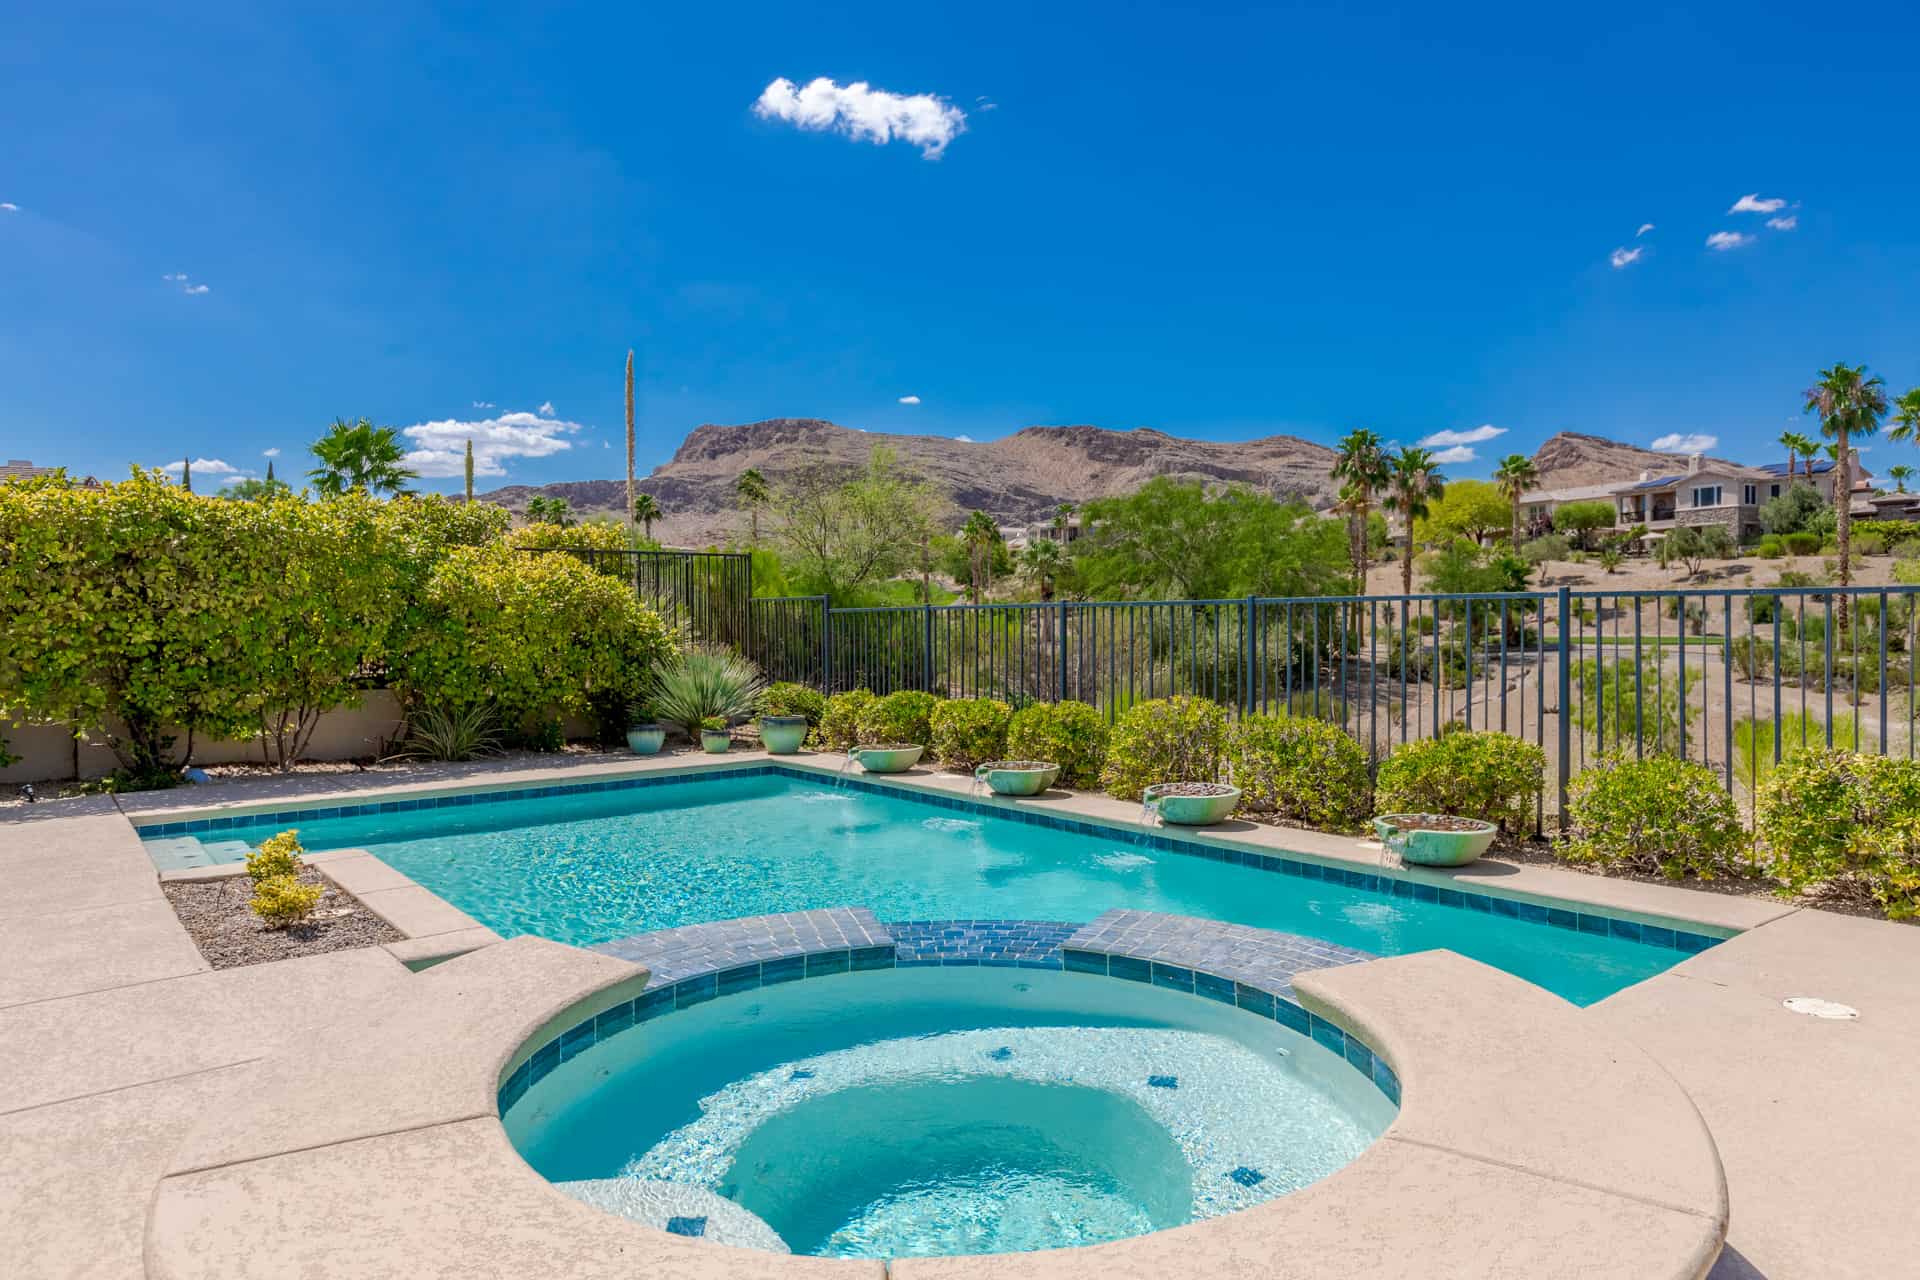 las-vegas-luxry-real-estate-realtor-rob-jensen-company-11434-glowing-sunset-lane-red-rock-country-club77